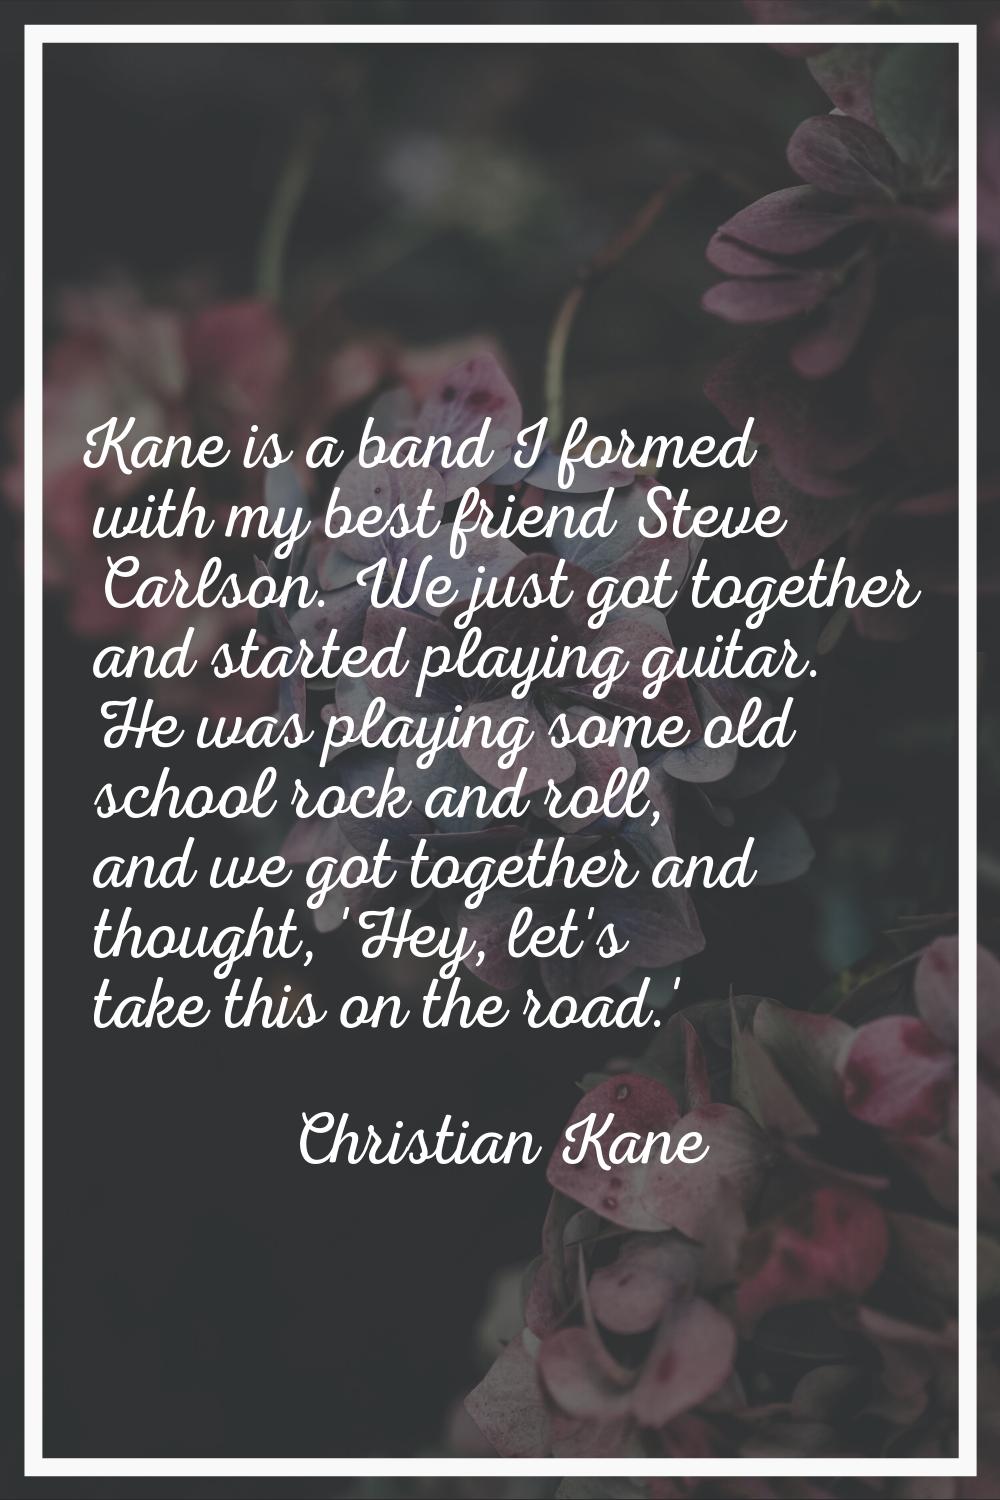 Kane is a band I formed with my best friend Steve Carlson. We just got together and started playing